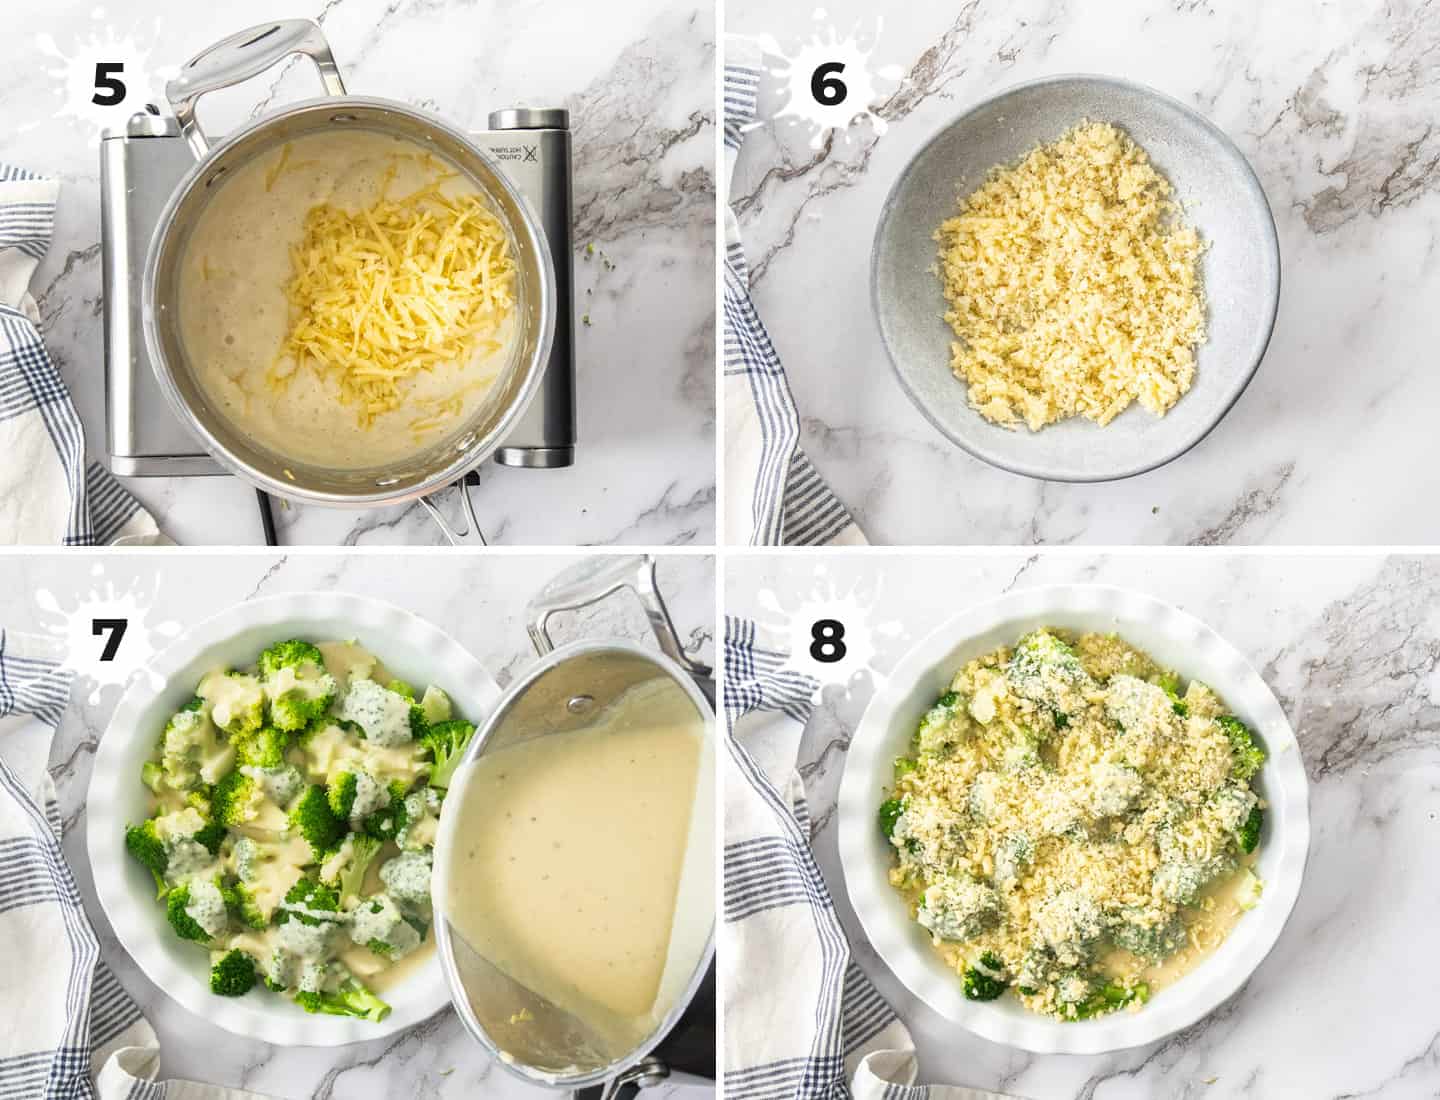 A collage of 4 images showing how to assemble the broccoli cheese.